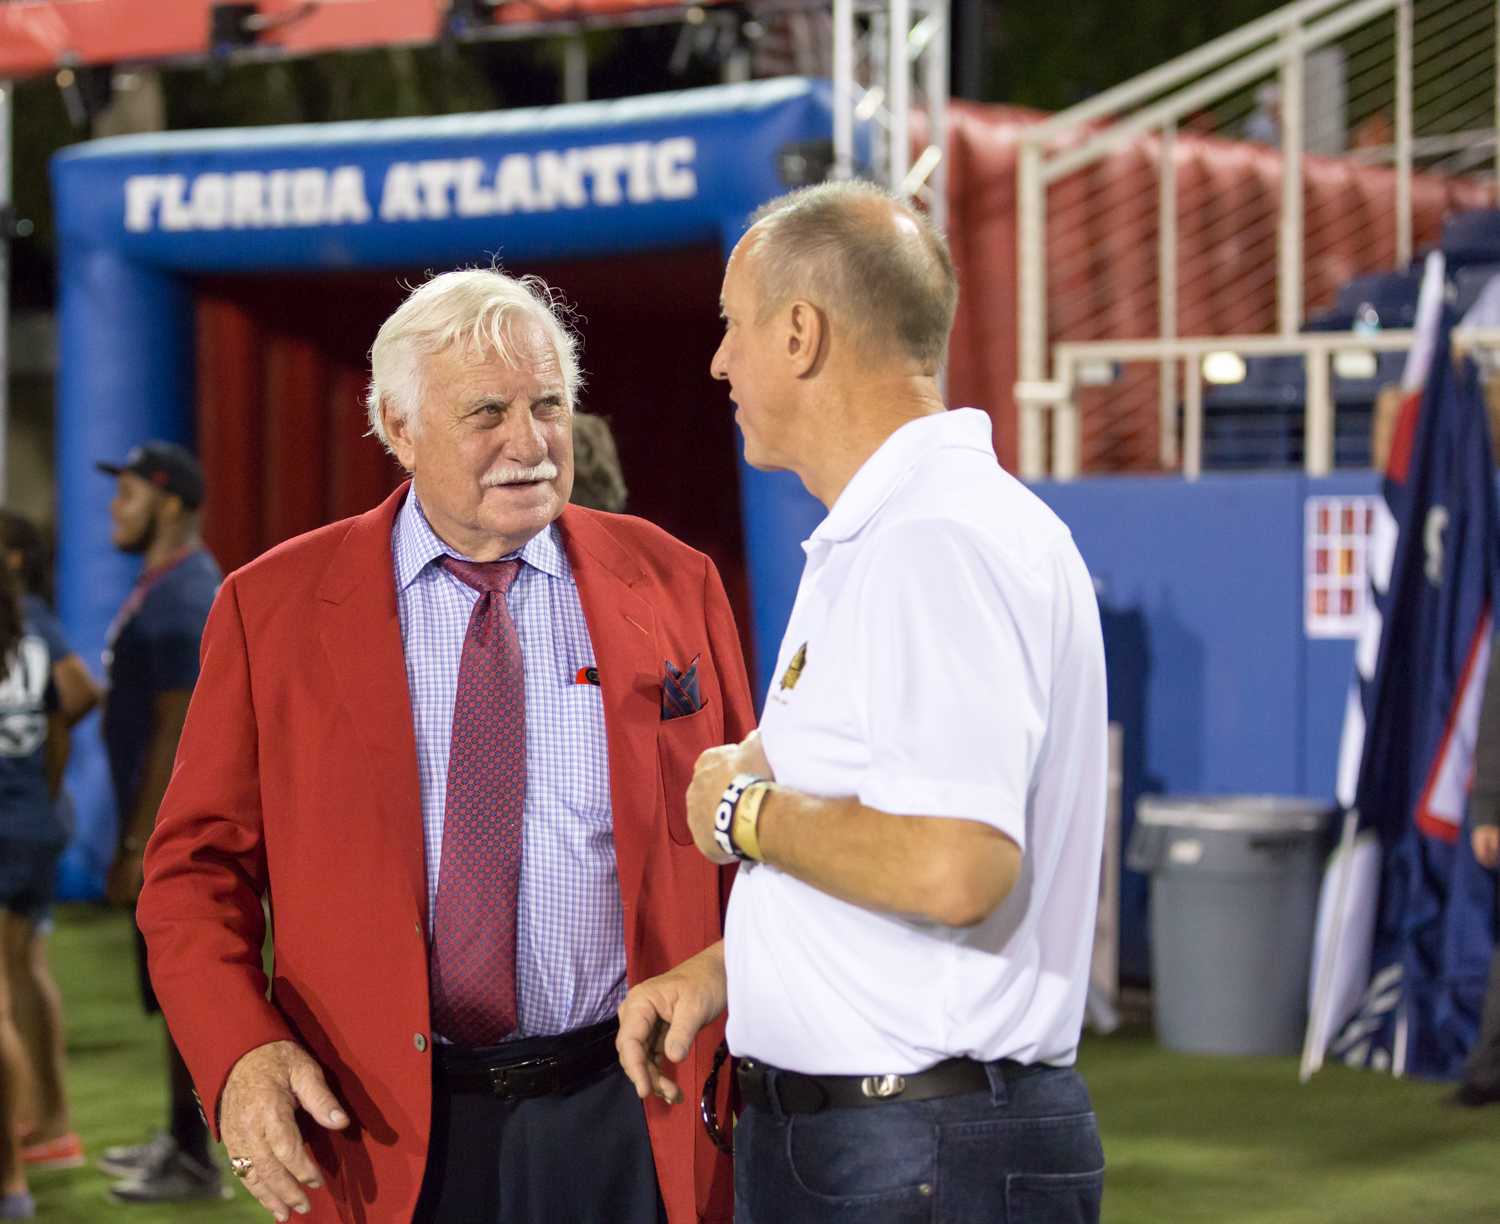  Howard Schnellenberger, former head football coach of both FAU and Miami’s teams, discusses the game with former NFL Buffalo Bills quarterback and University of Miami alumni Jim Kelly. Schnellenberger coached the Owl football program for 11 seasons, retiring after the 2011 season. Brandon Harrington | Contributing Photographer